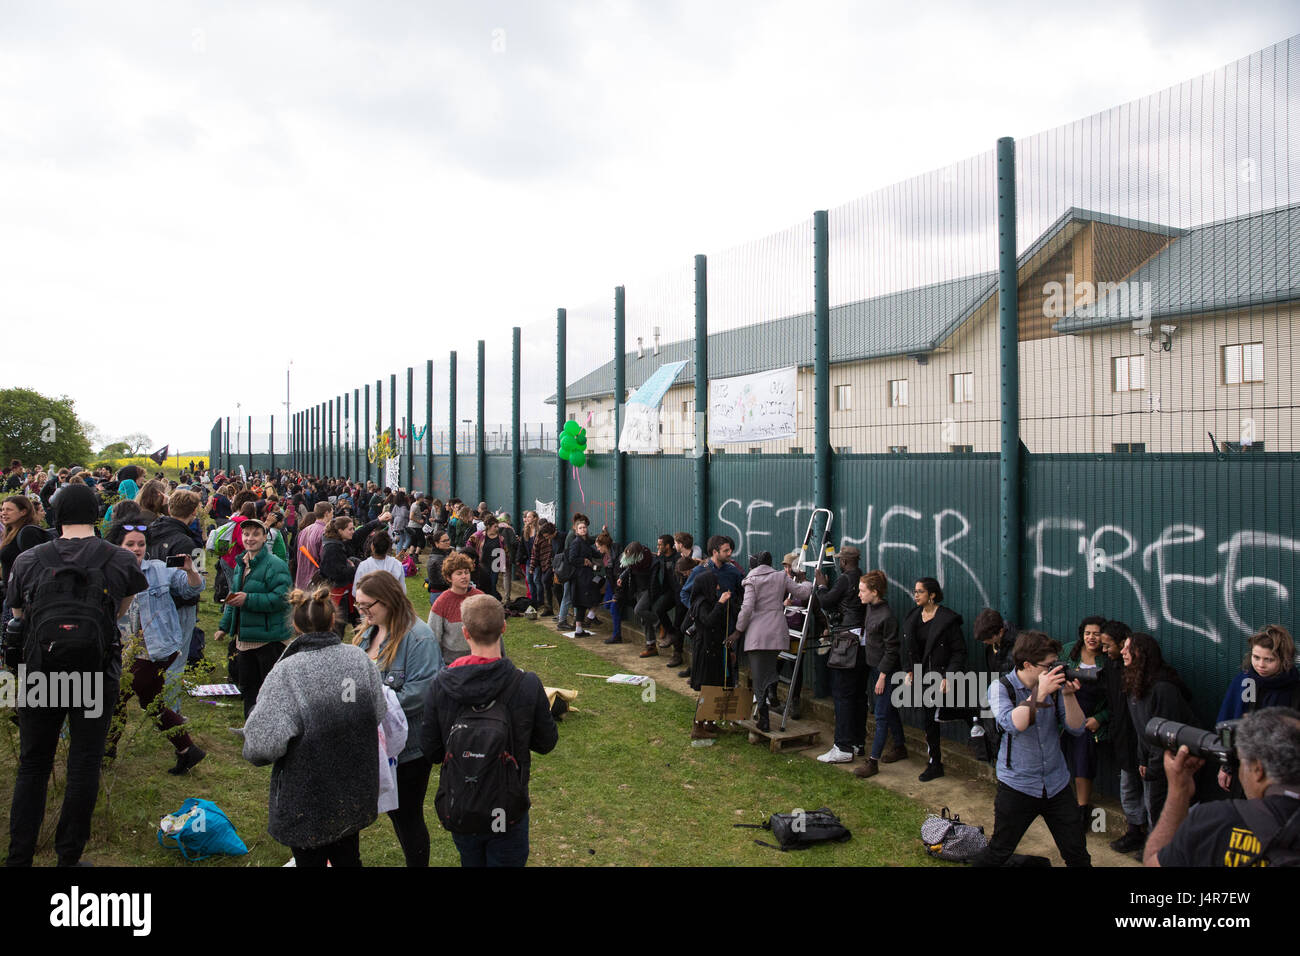 Milton Ernest, UK. 13th May, 2017. Campaigners against immigration detention kick the perimeter fence of Yarl's Wood Immigration Removal Centre during a protest organised by Movement For Justice By Any Means Necessary. Campaigners, including former detainees, called for all immigration detention centres to be closed. Credit: Mark Kerrison/Alamy Live News Stock Photo